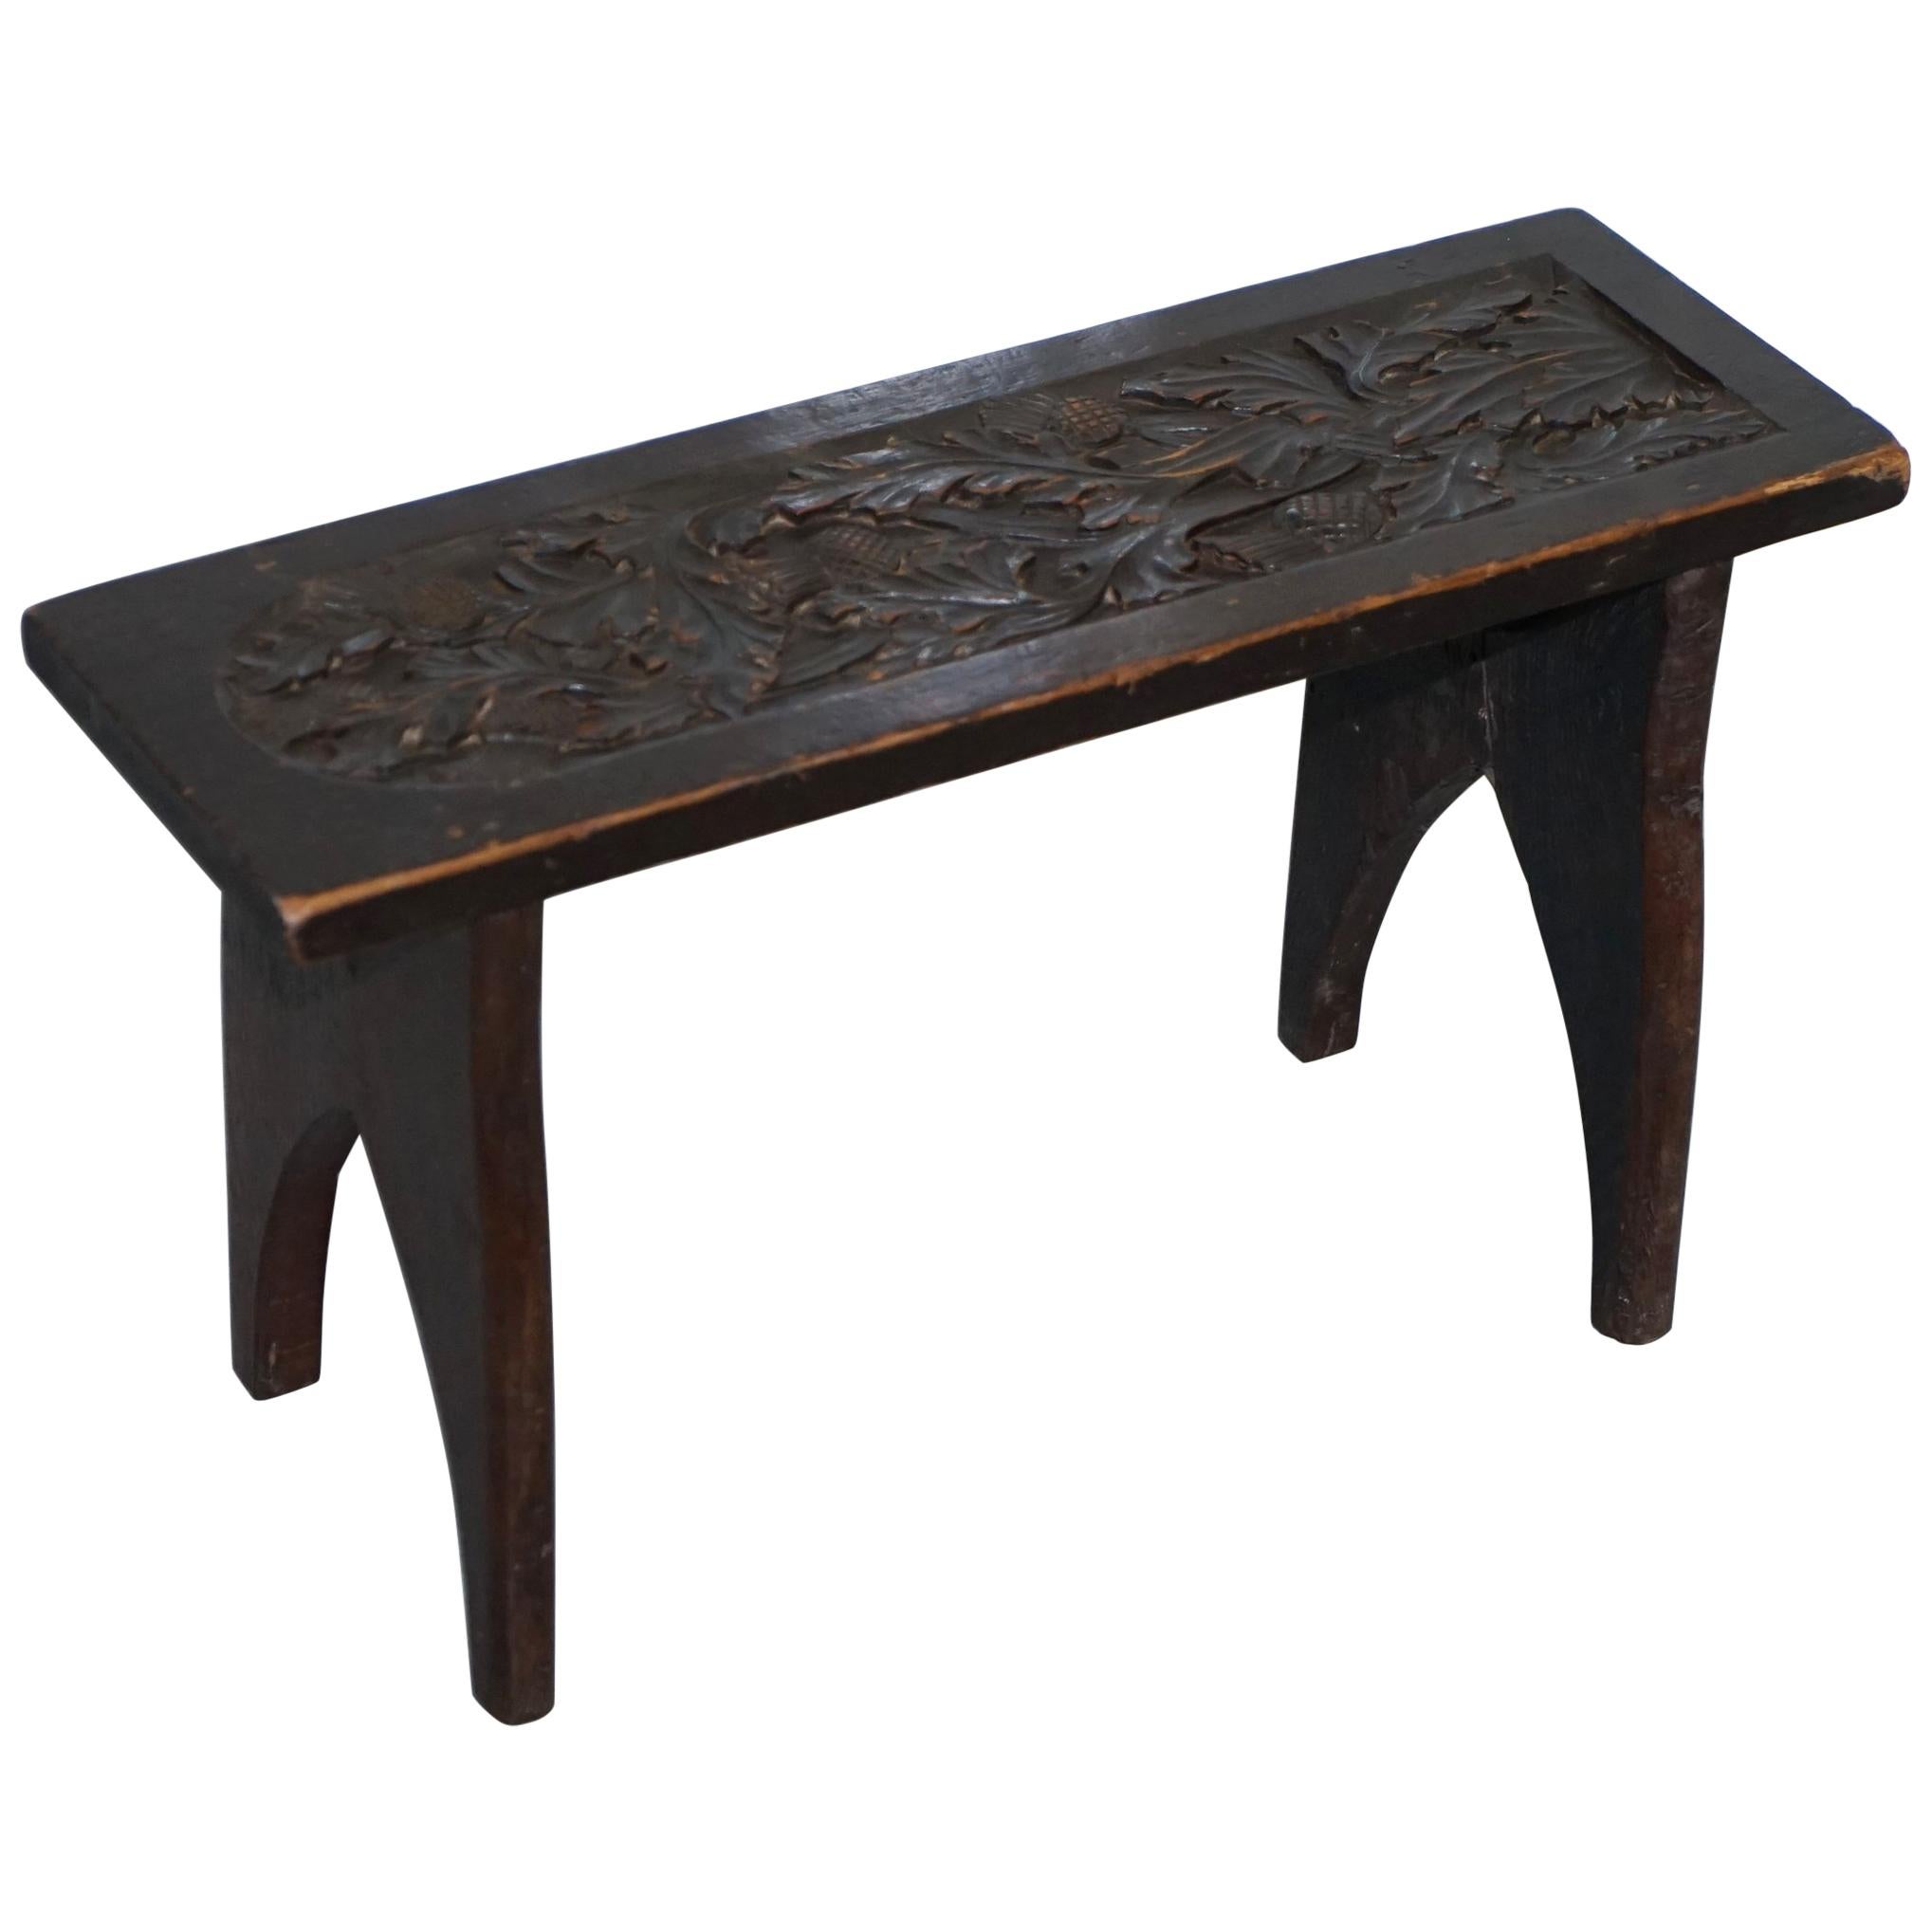 Sweet Little Liberty's London English Oak Small Side Table Hand-Carved Floral